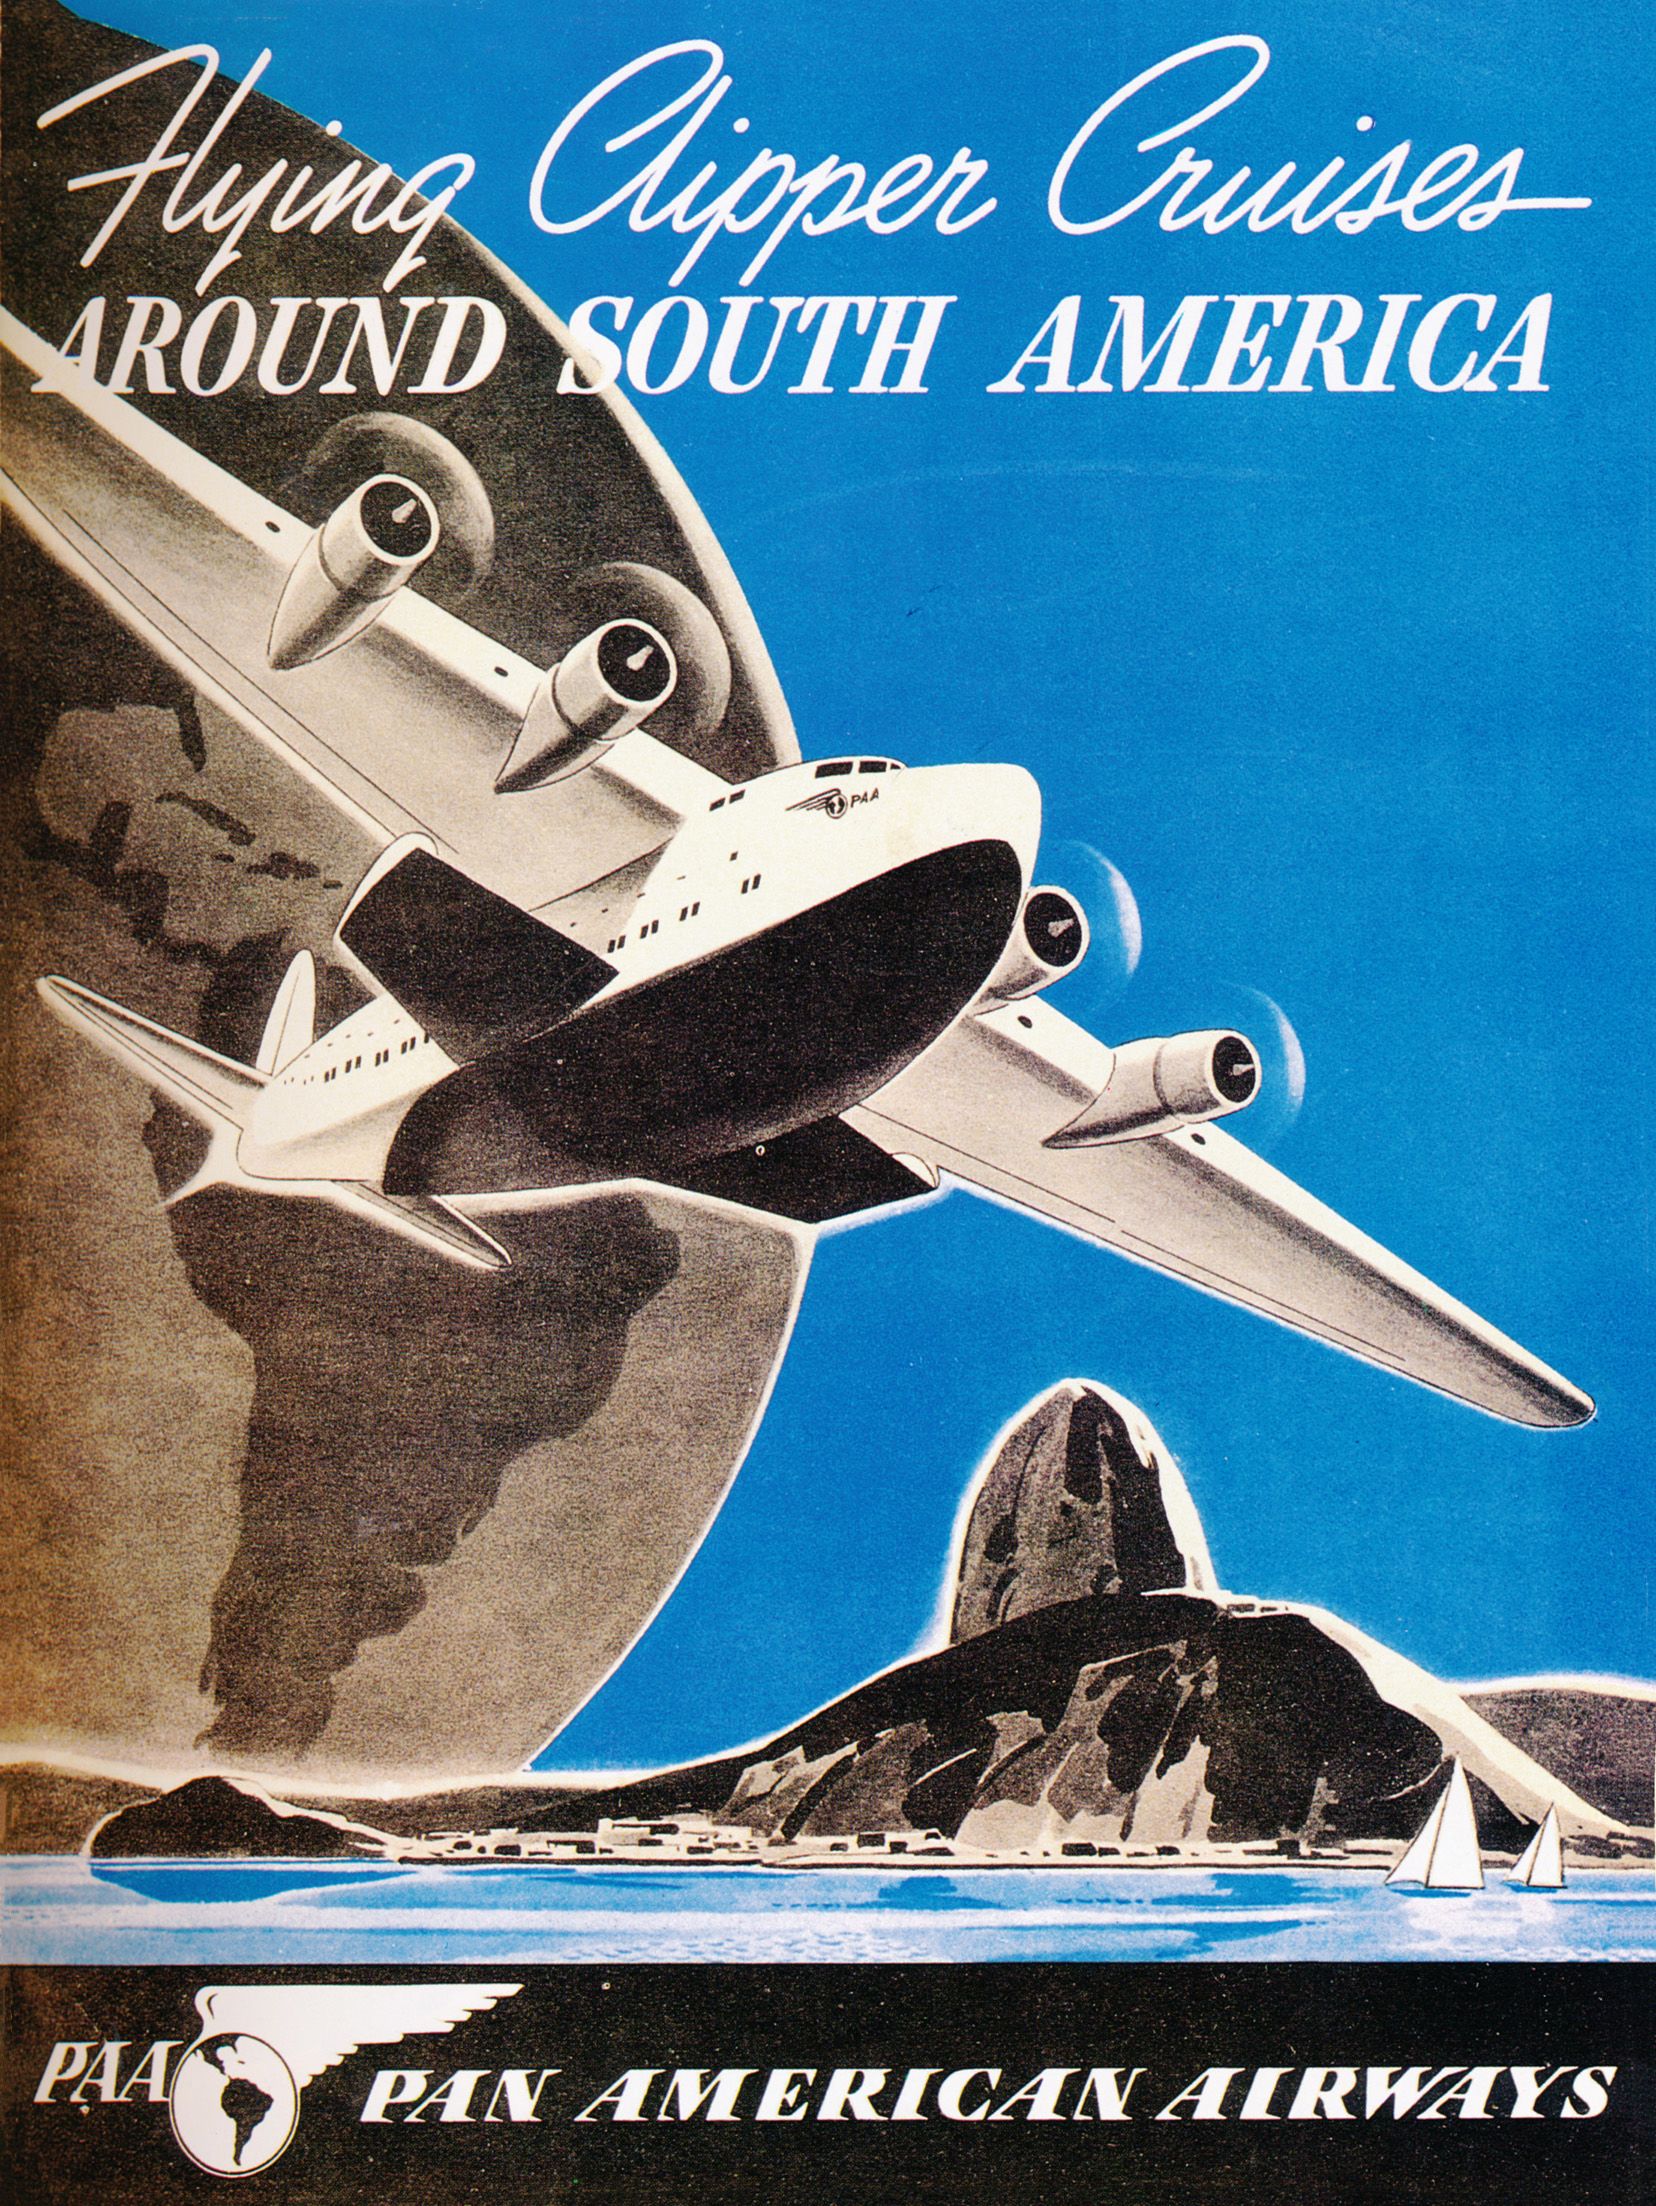 Ad circa 1940:  "Flying Clipper Cruises -- AROUND SOUTH AMERICA." Don Thomas Collection. 